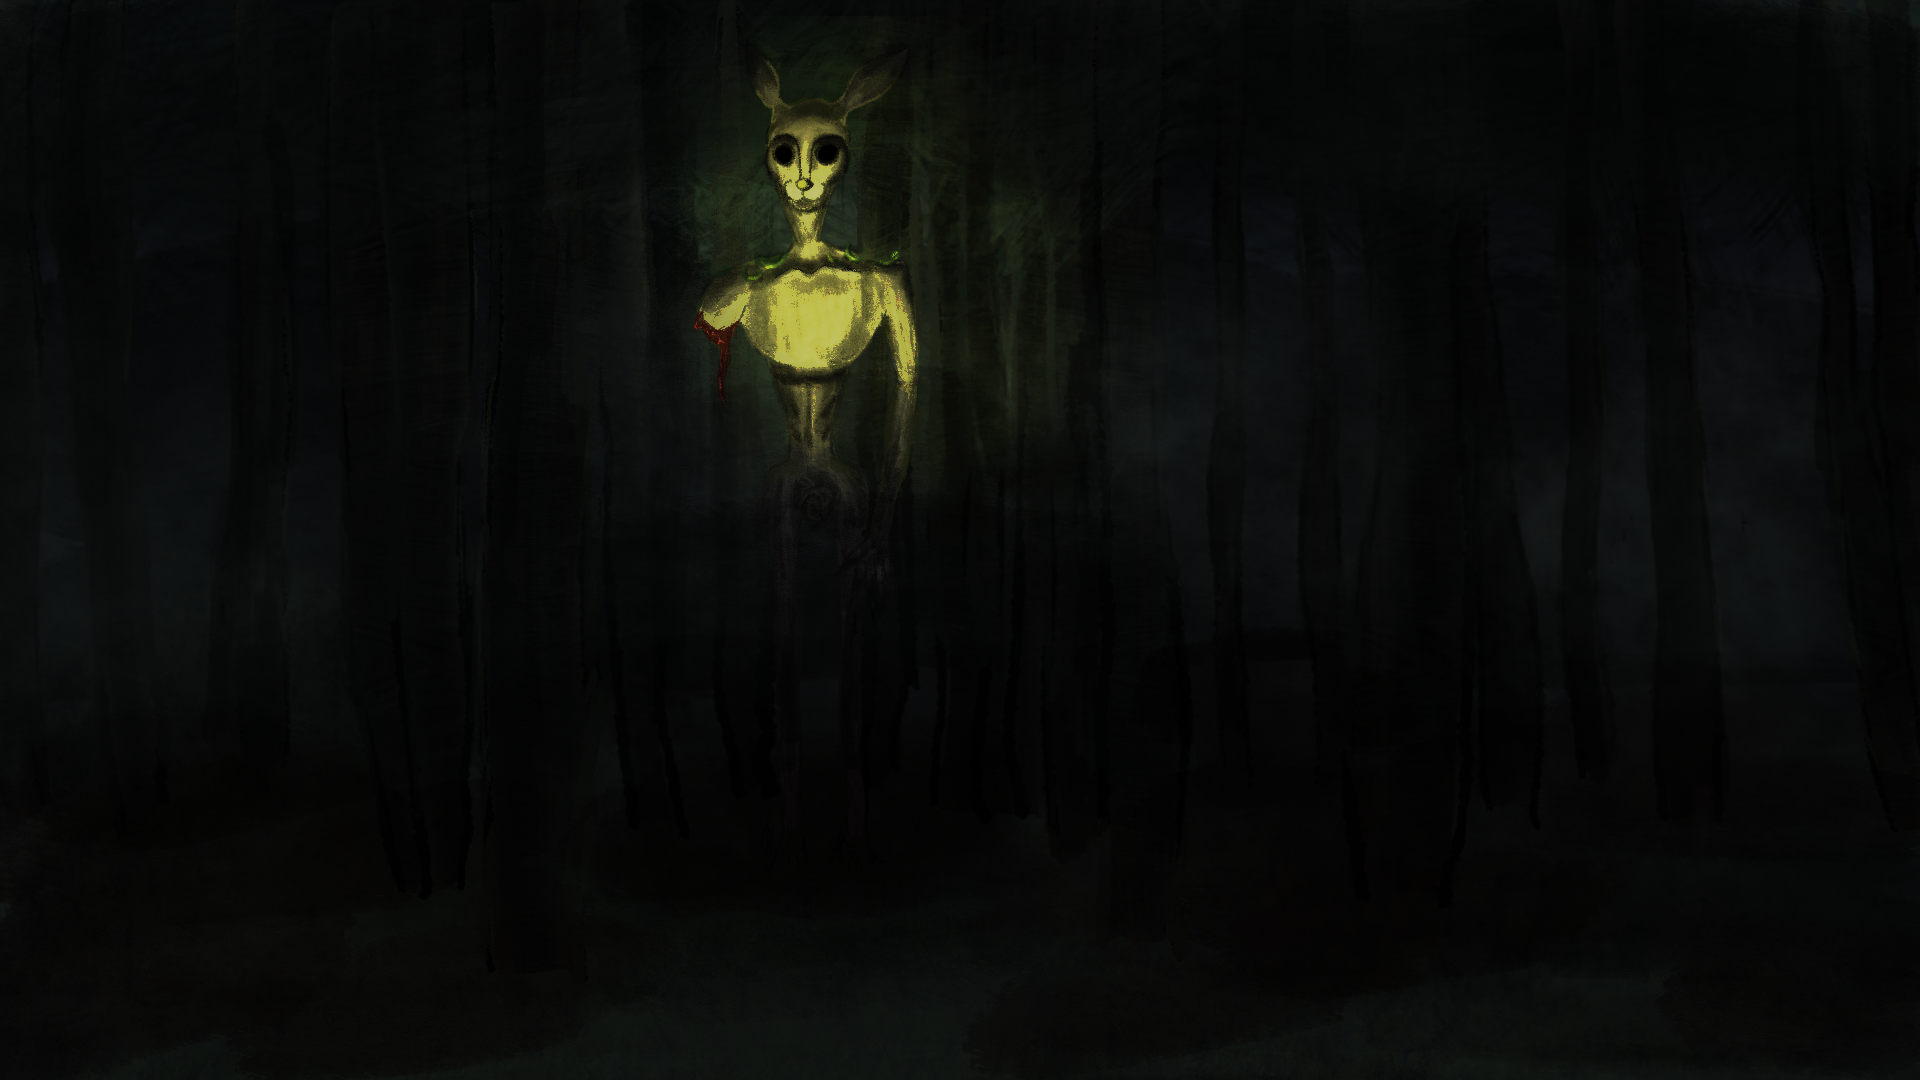 A tall bunny-like creature on two legs in the dark woods.